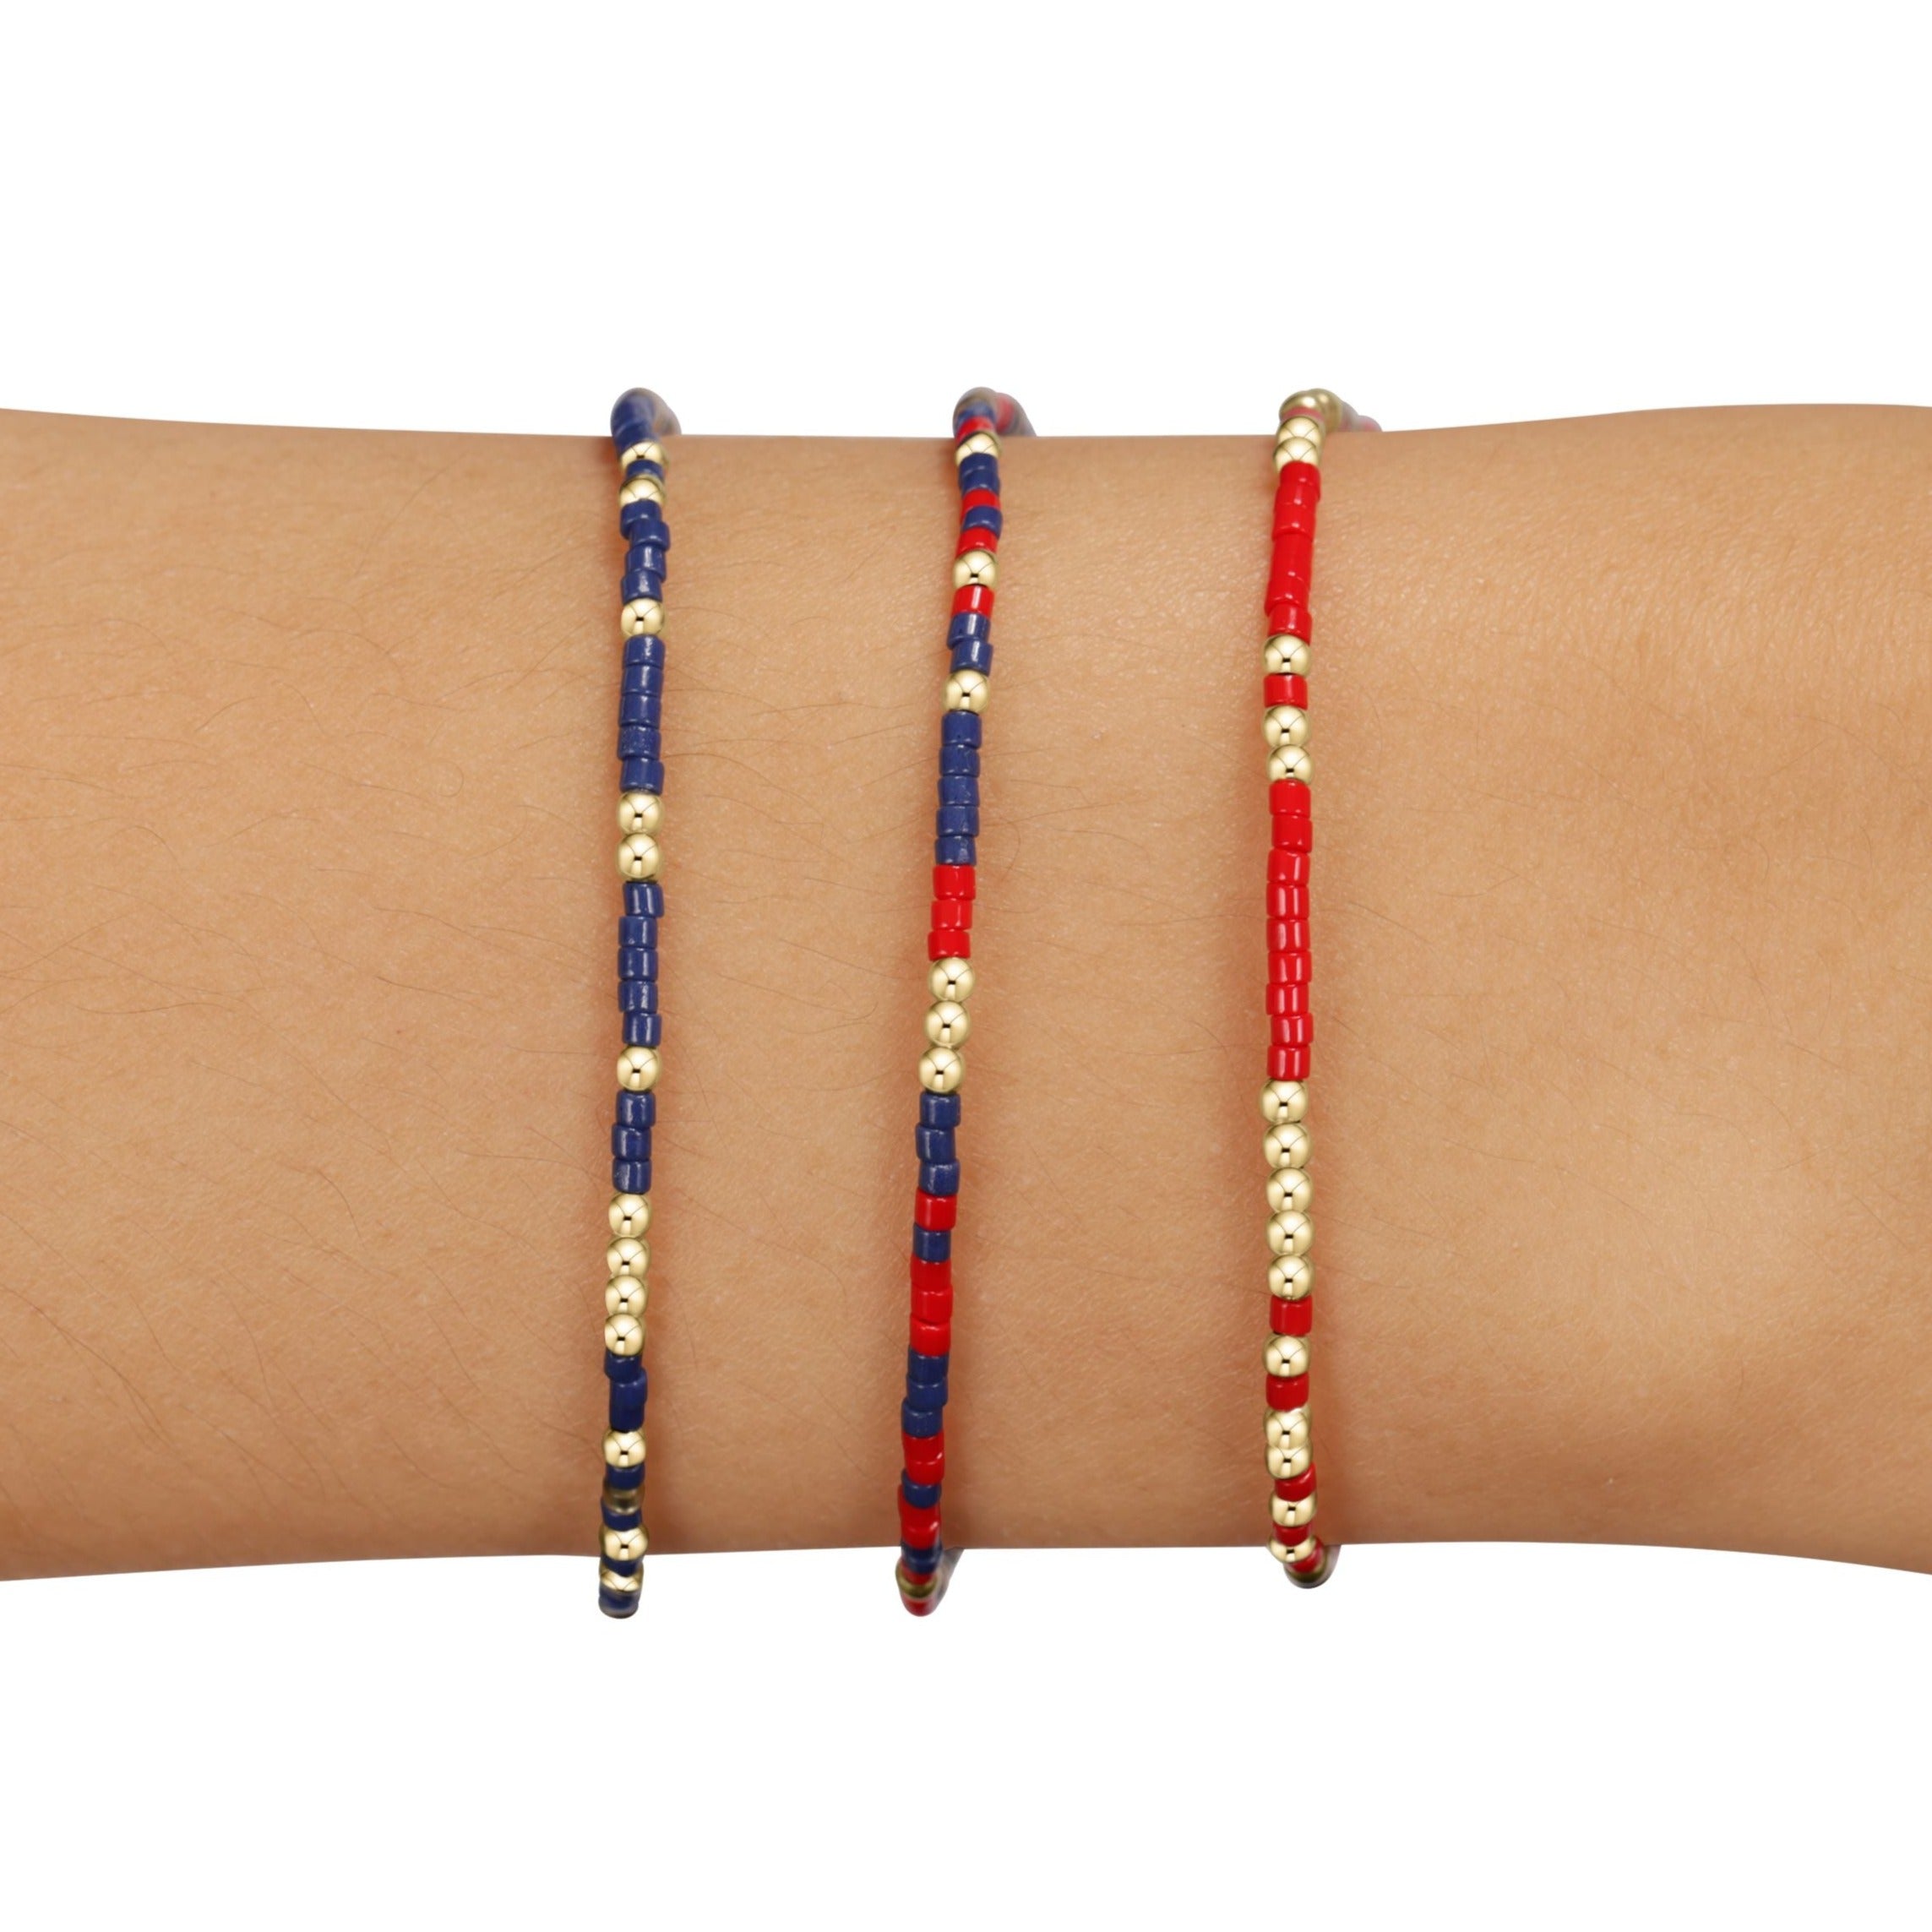 "Down, Set, Hut" Gameday Stack of 3 - Navy-Bright Red